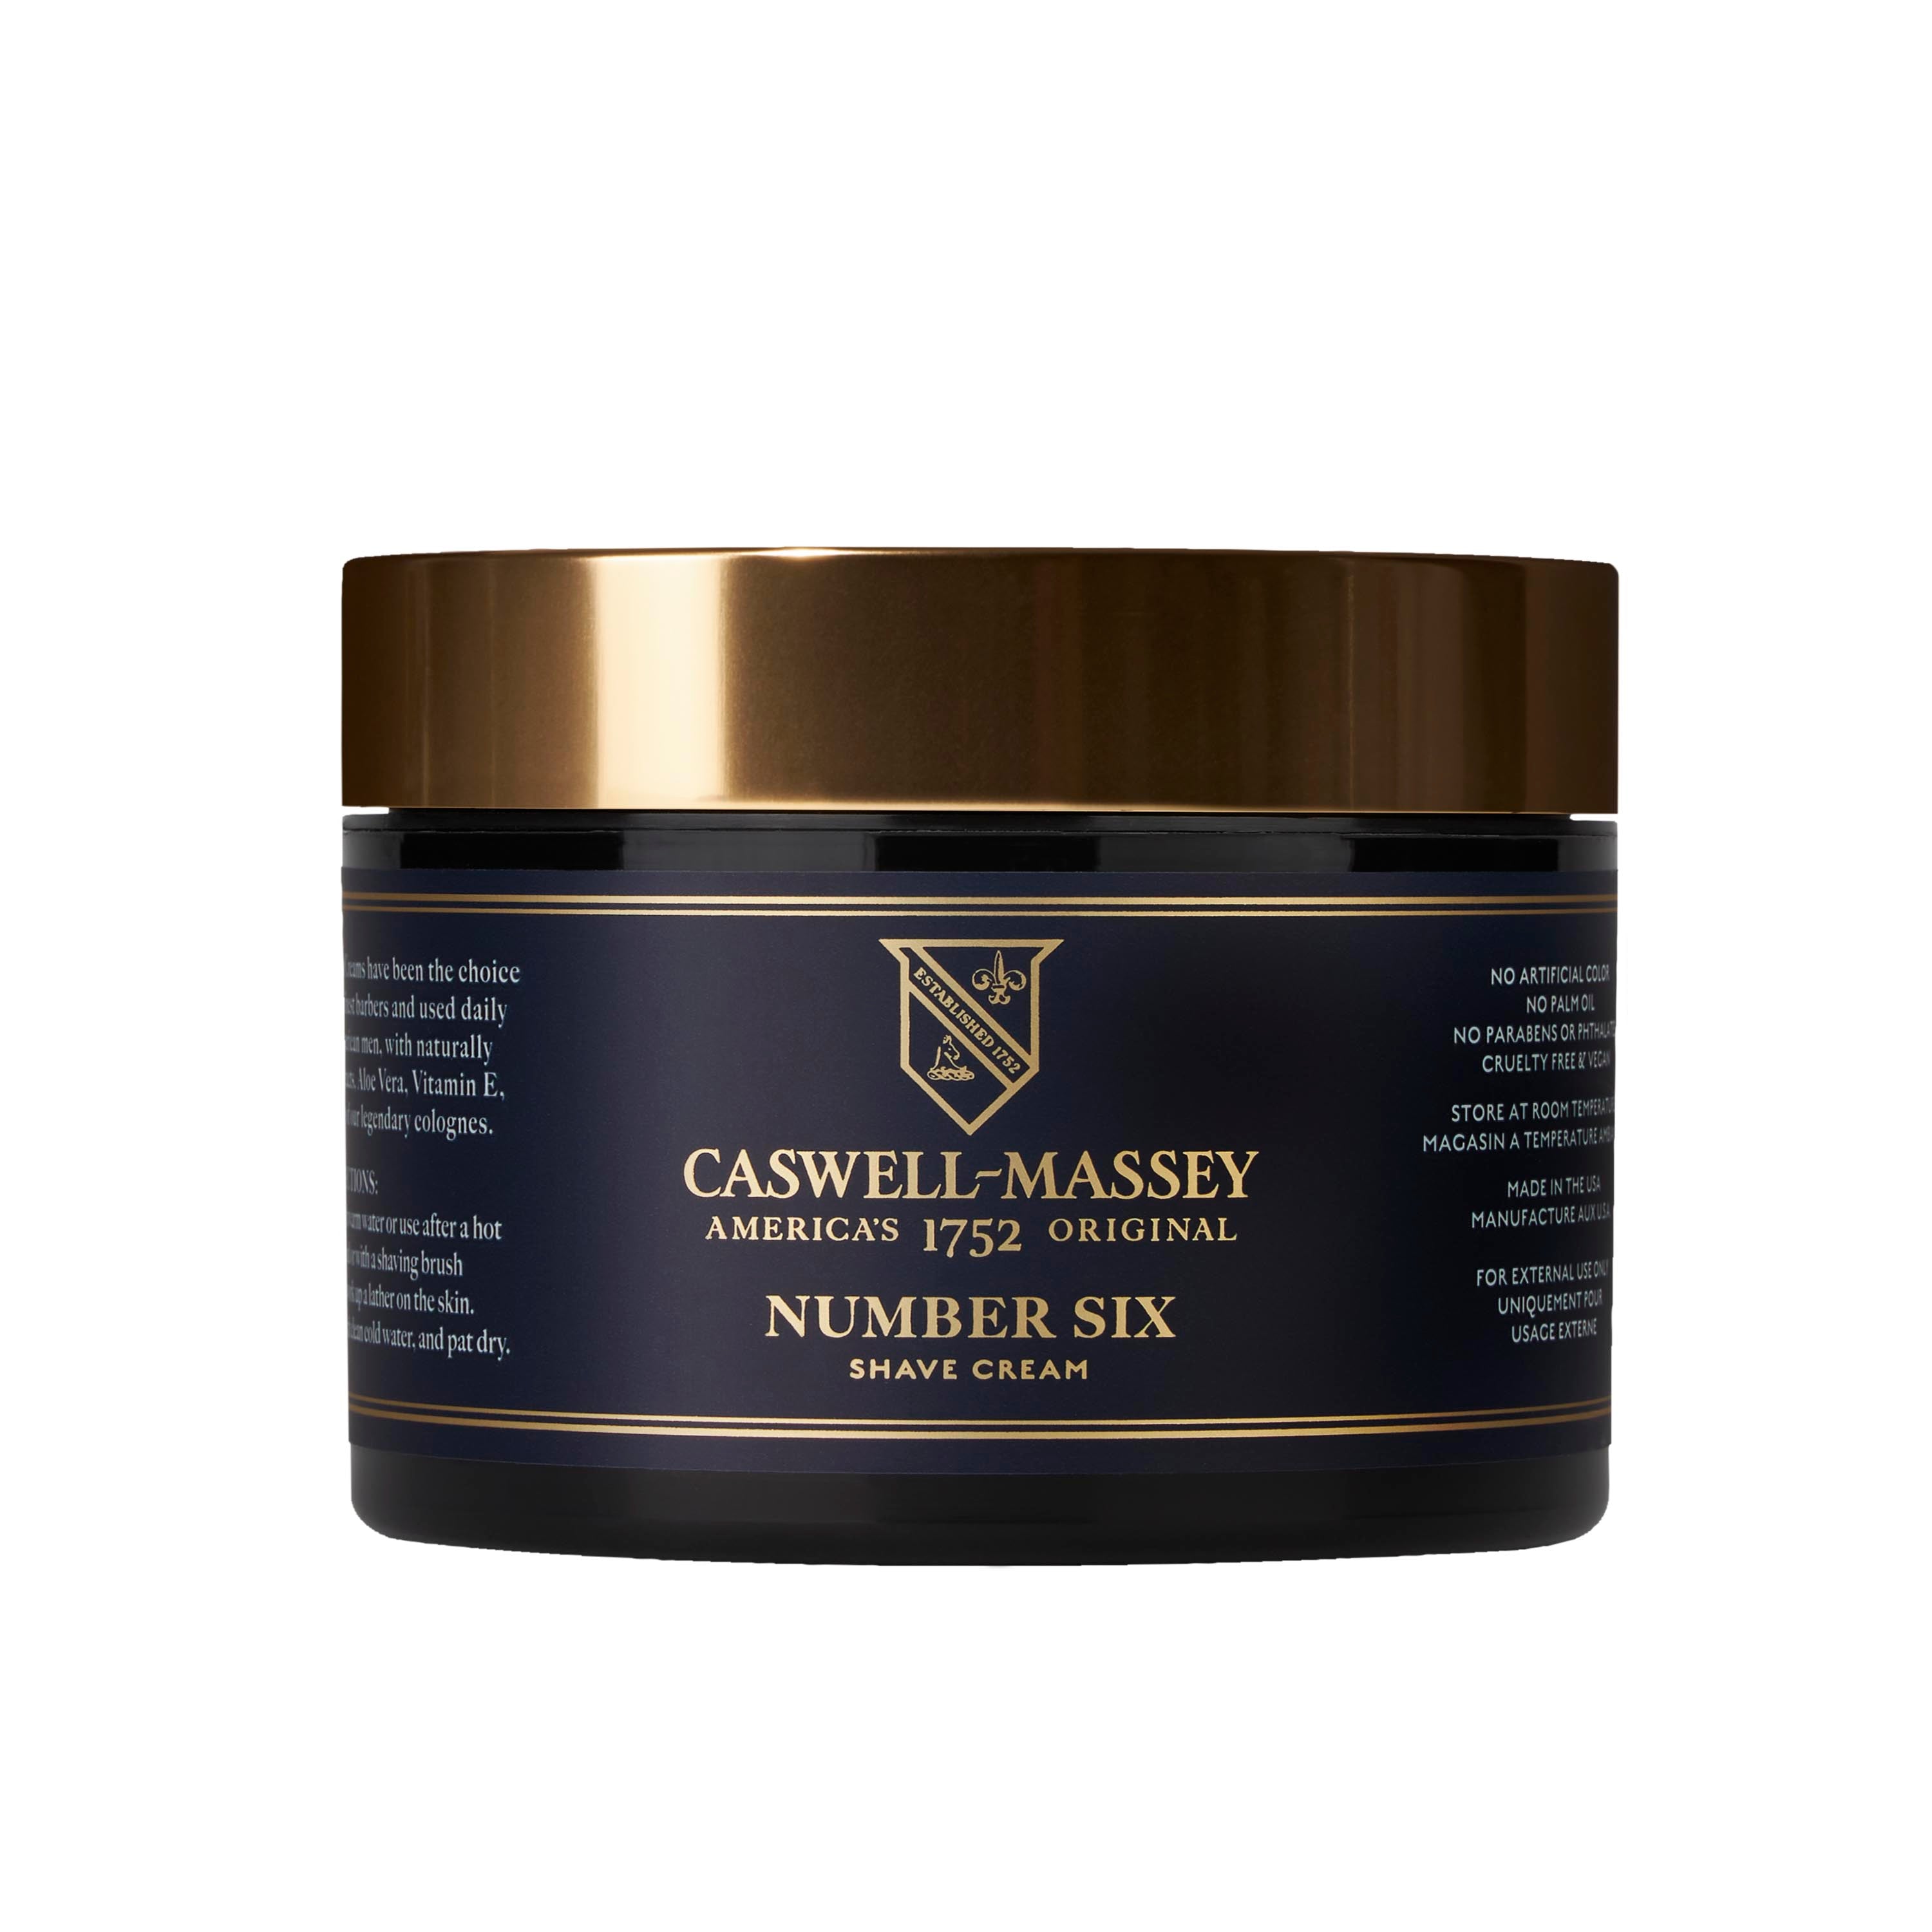 Number Six Shave Cream Shave Cream Jar Caswell-Massey®   